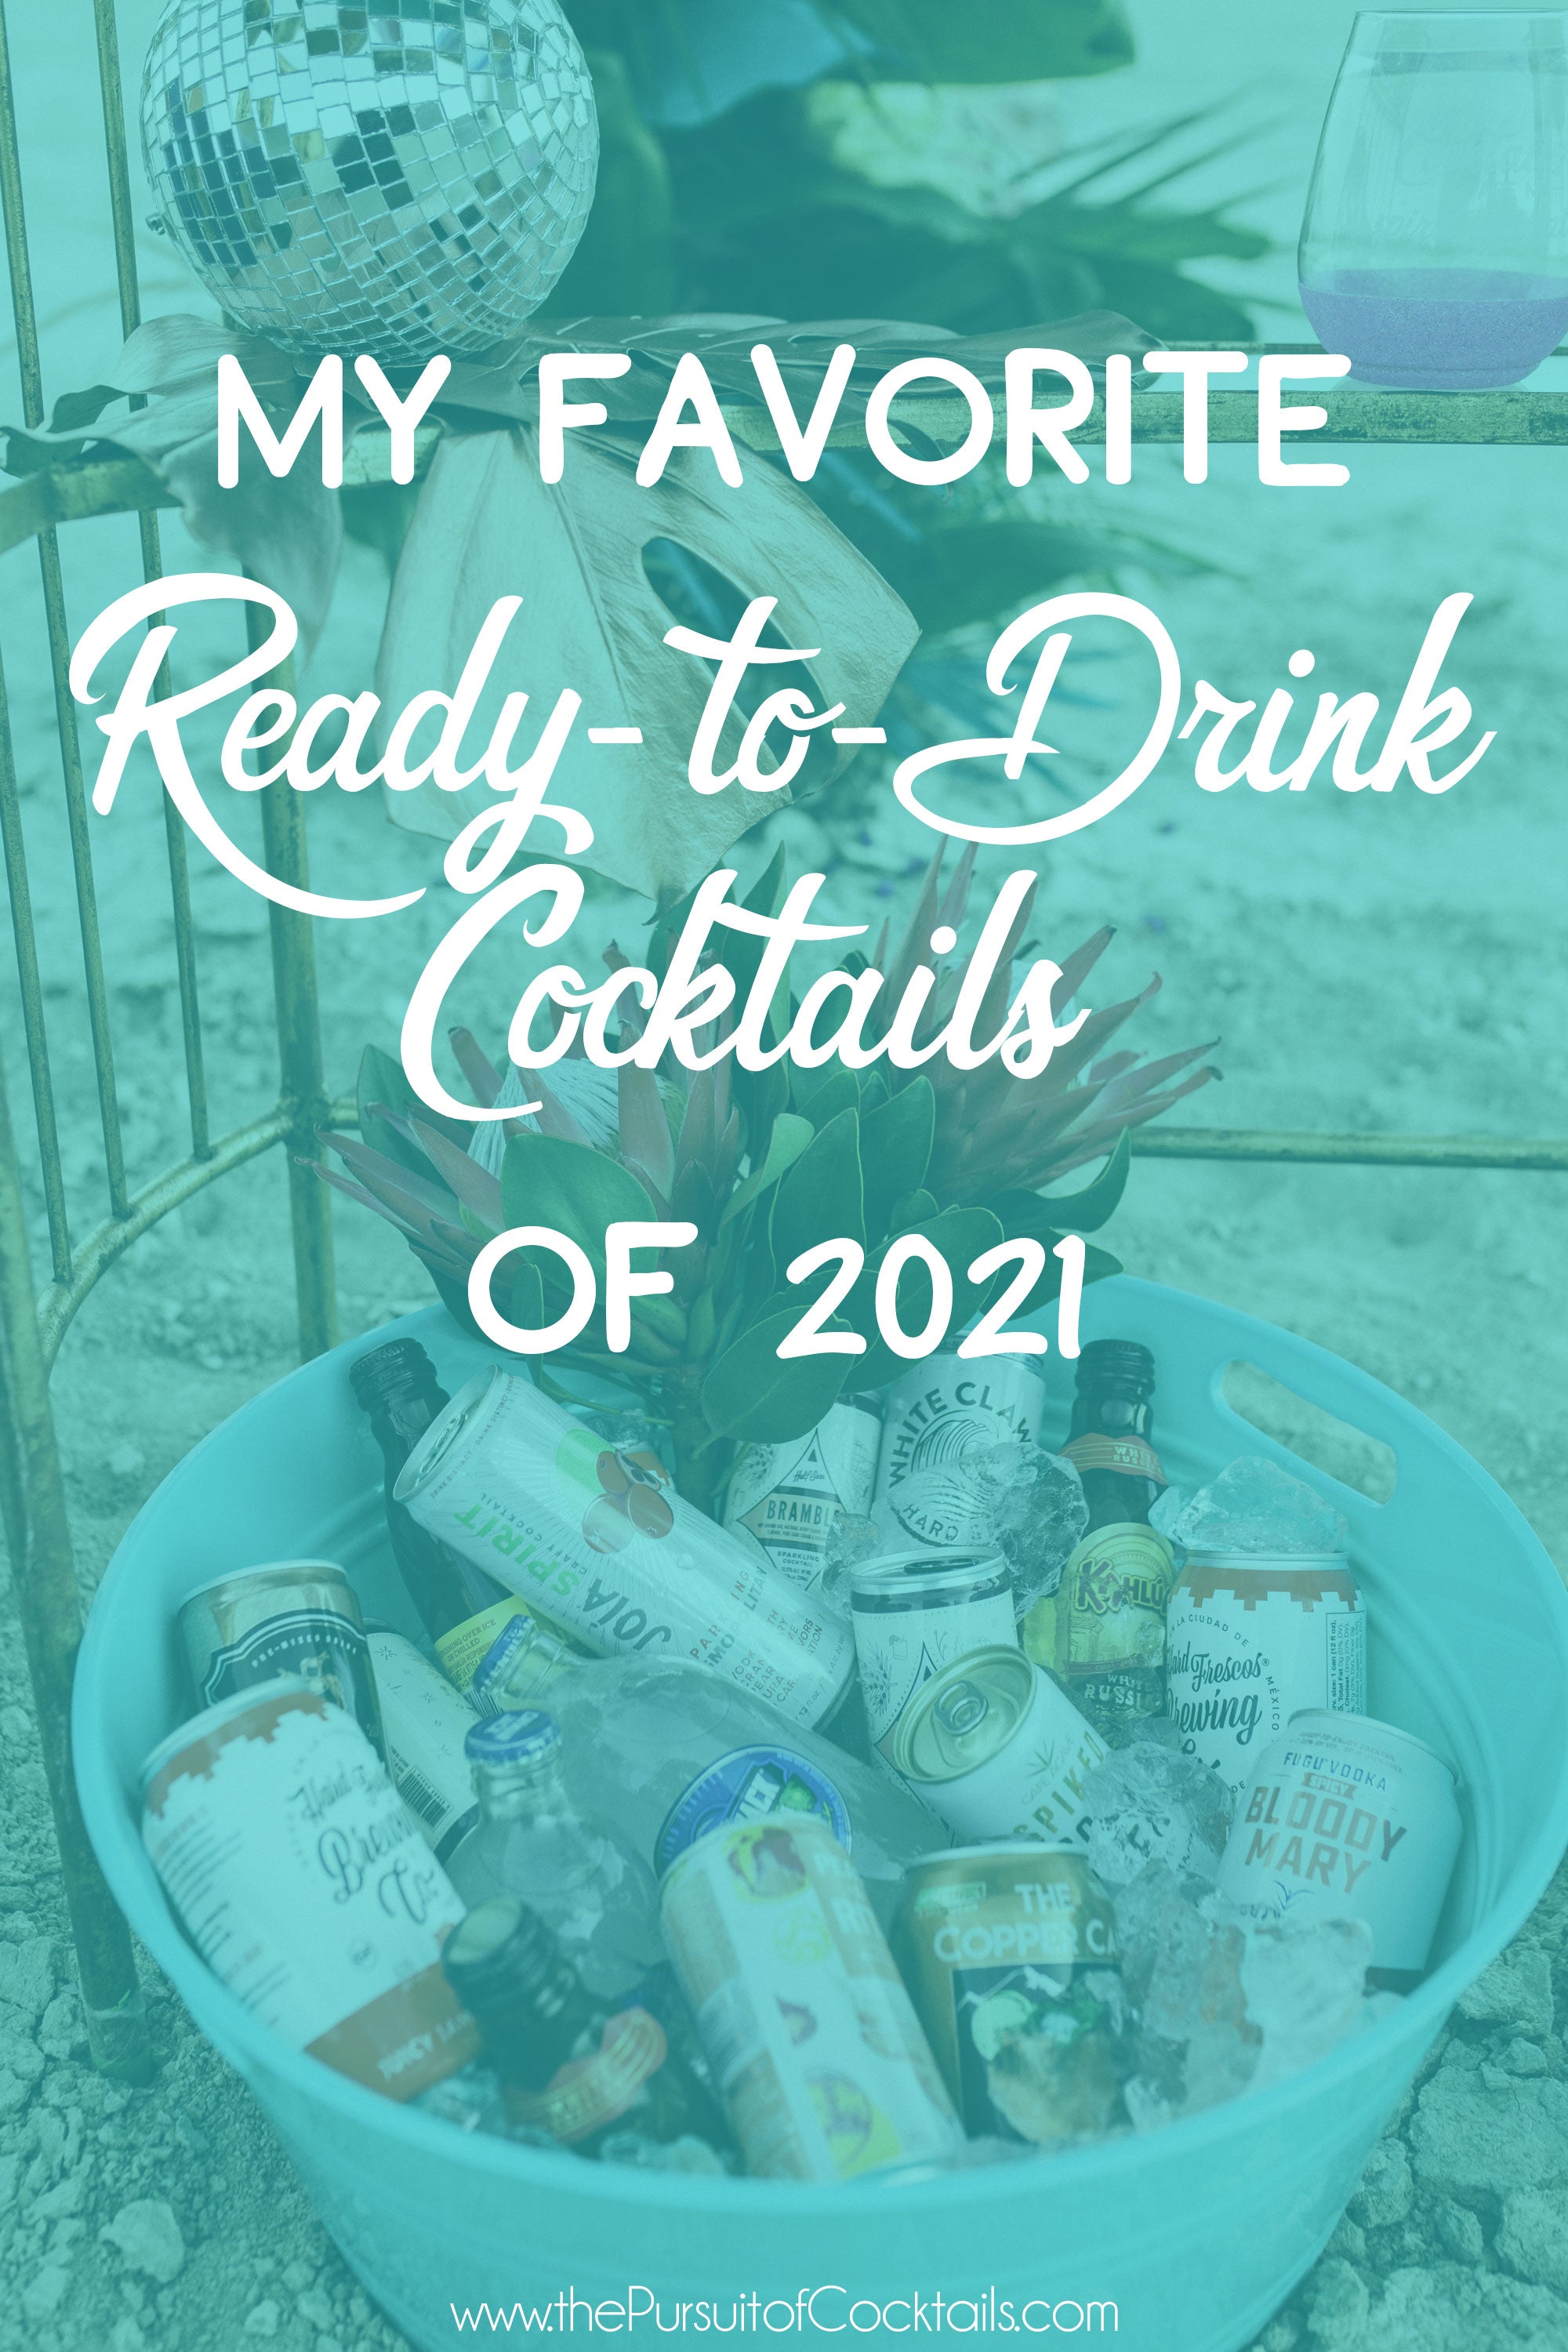 Best ready-to-drink cocktails and canned cocktails of 2021 from The Pursuit of Cocktails